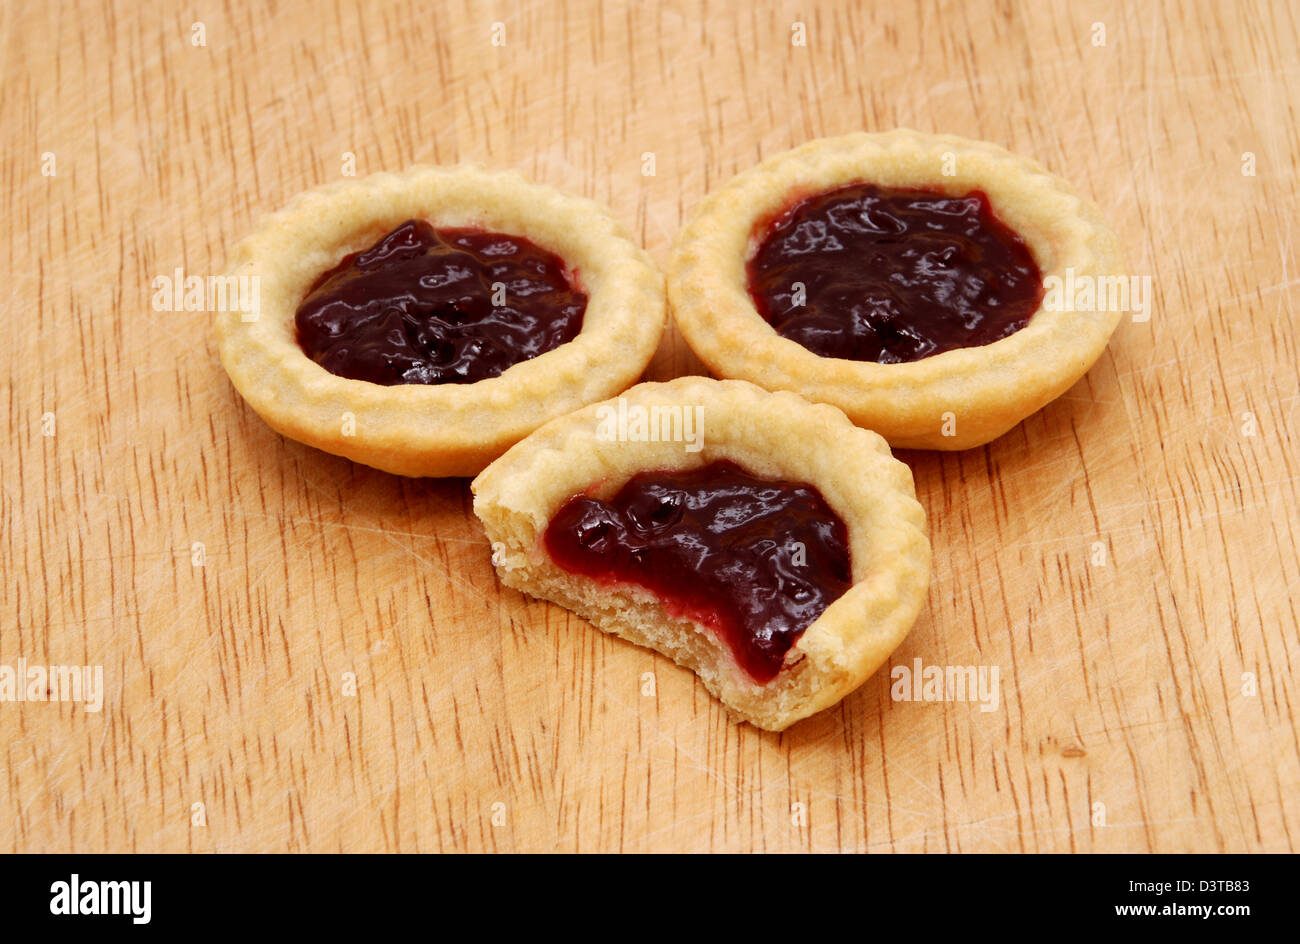 Three yummy jam tarts, one with a bite taken from it, on a wooden table Stock Photo